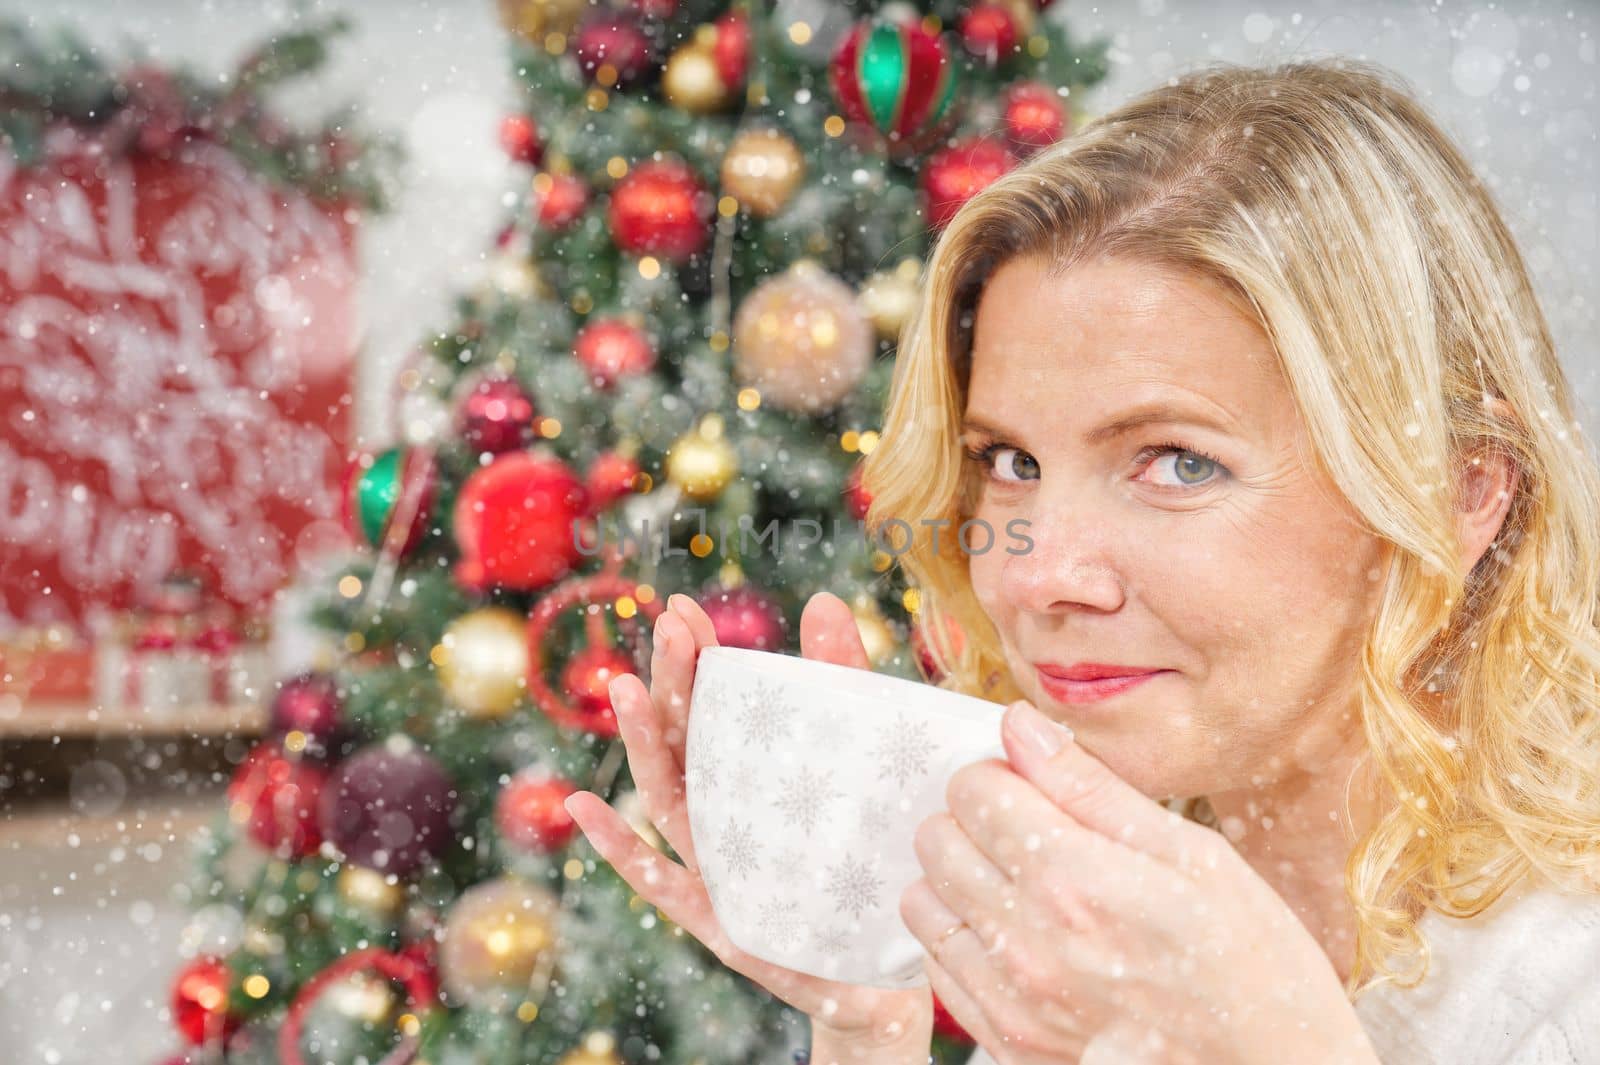 Girl in white sweater holding a cup of warm coffee or tea on background of a Christmas tree. by PhotoTime